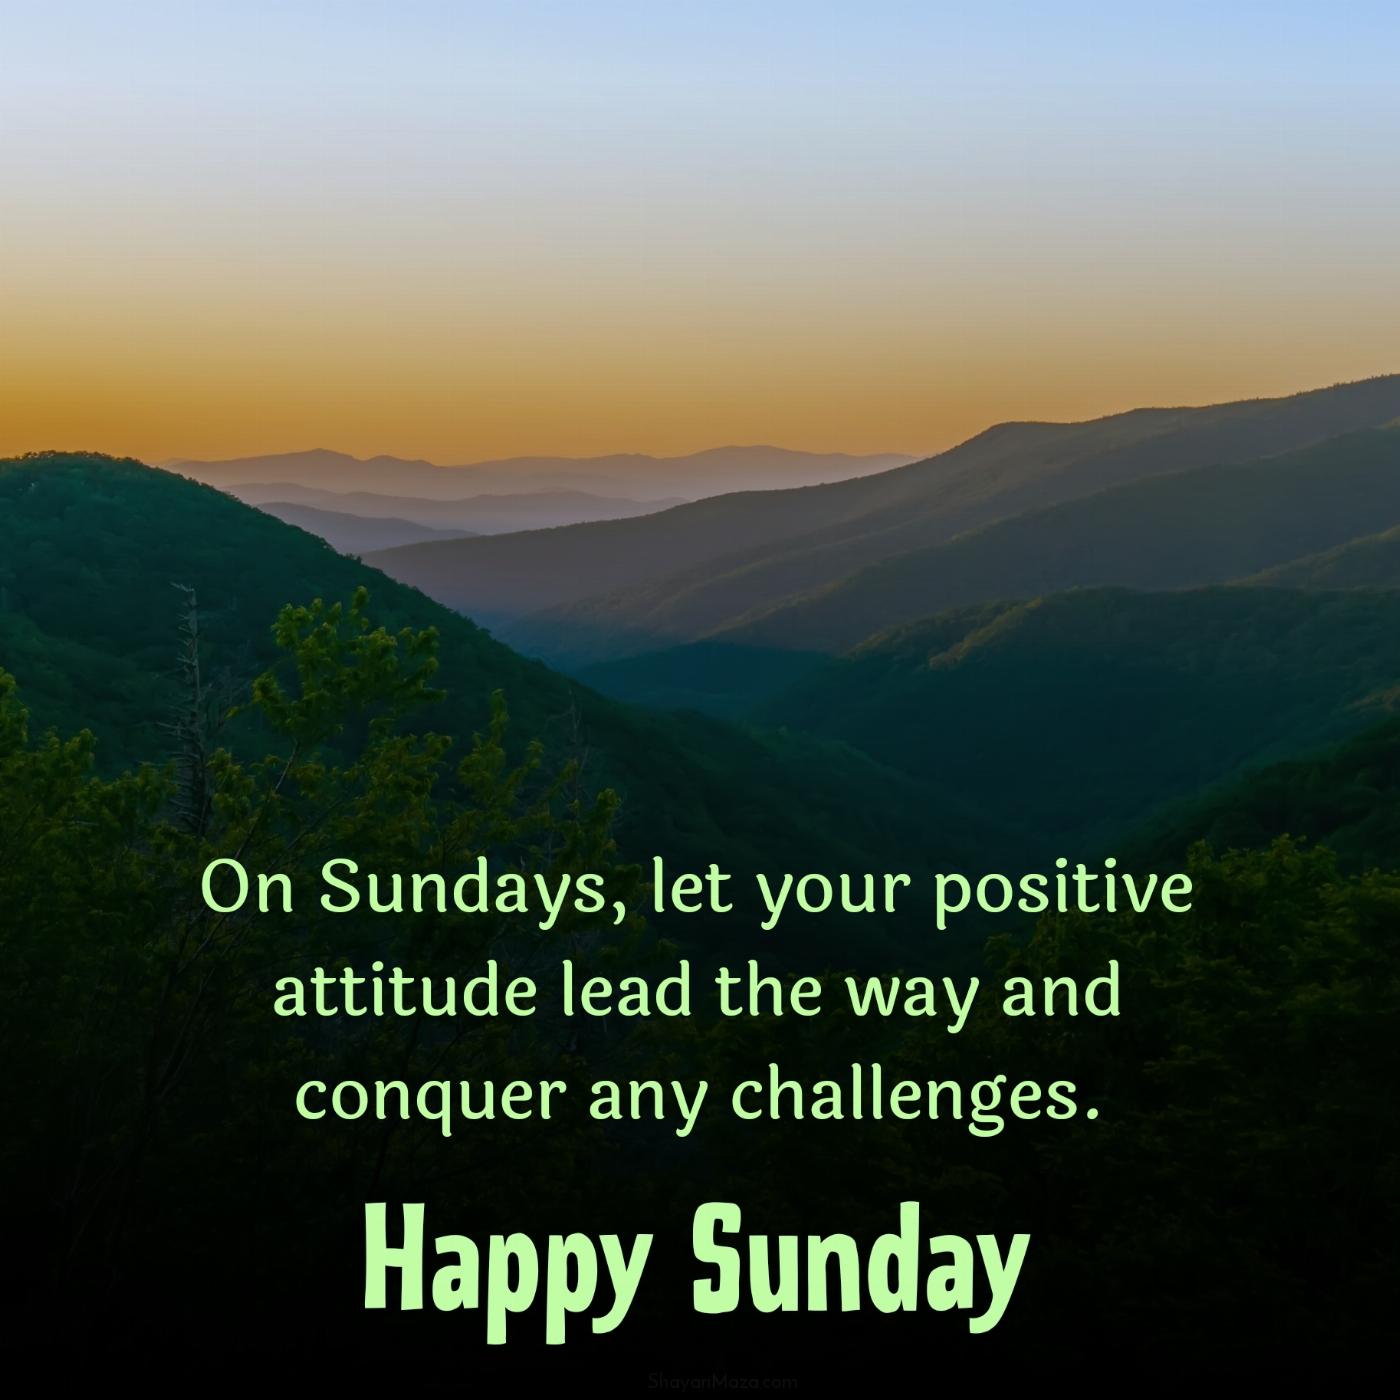 On Sundays let your positive attitude lead the way and conquer